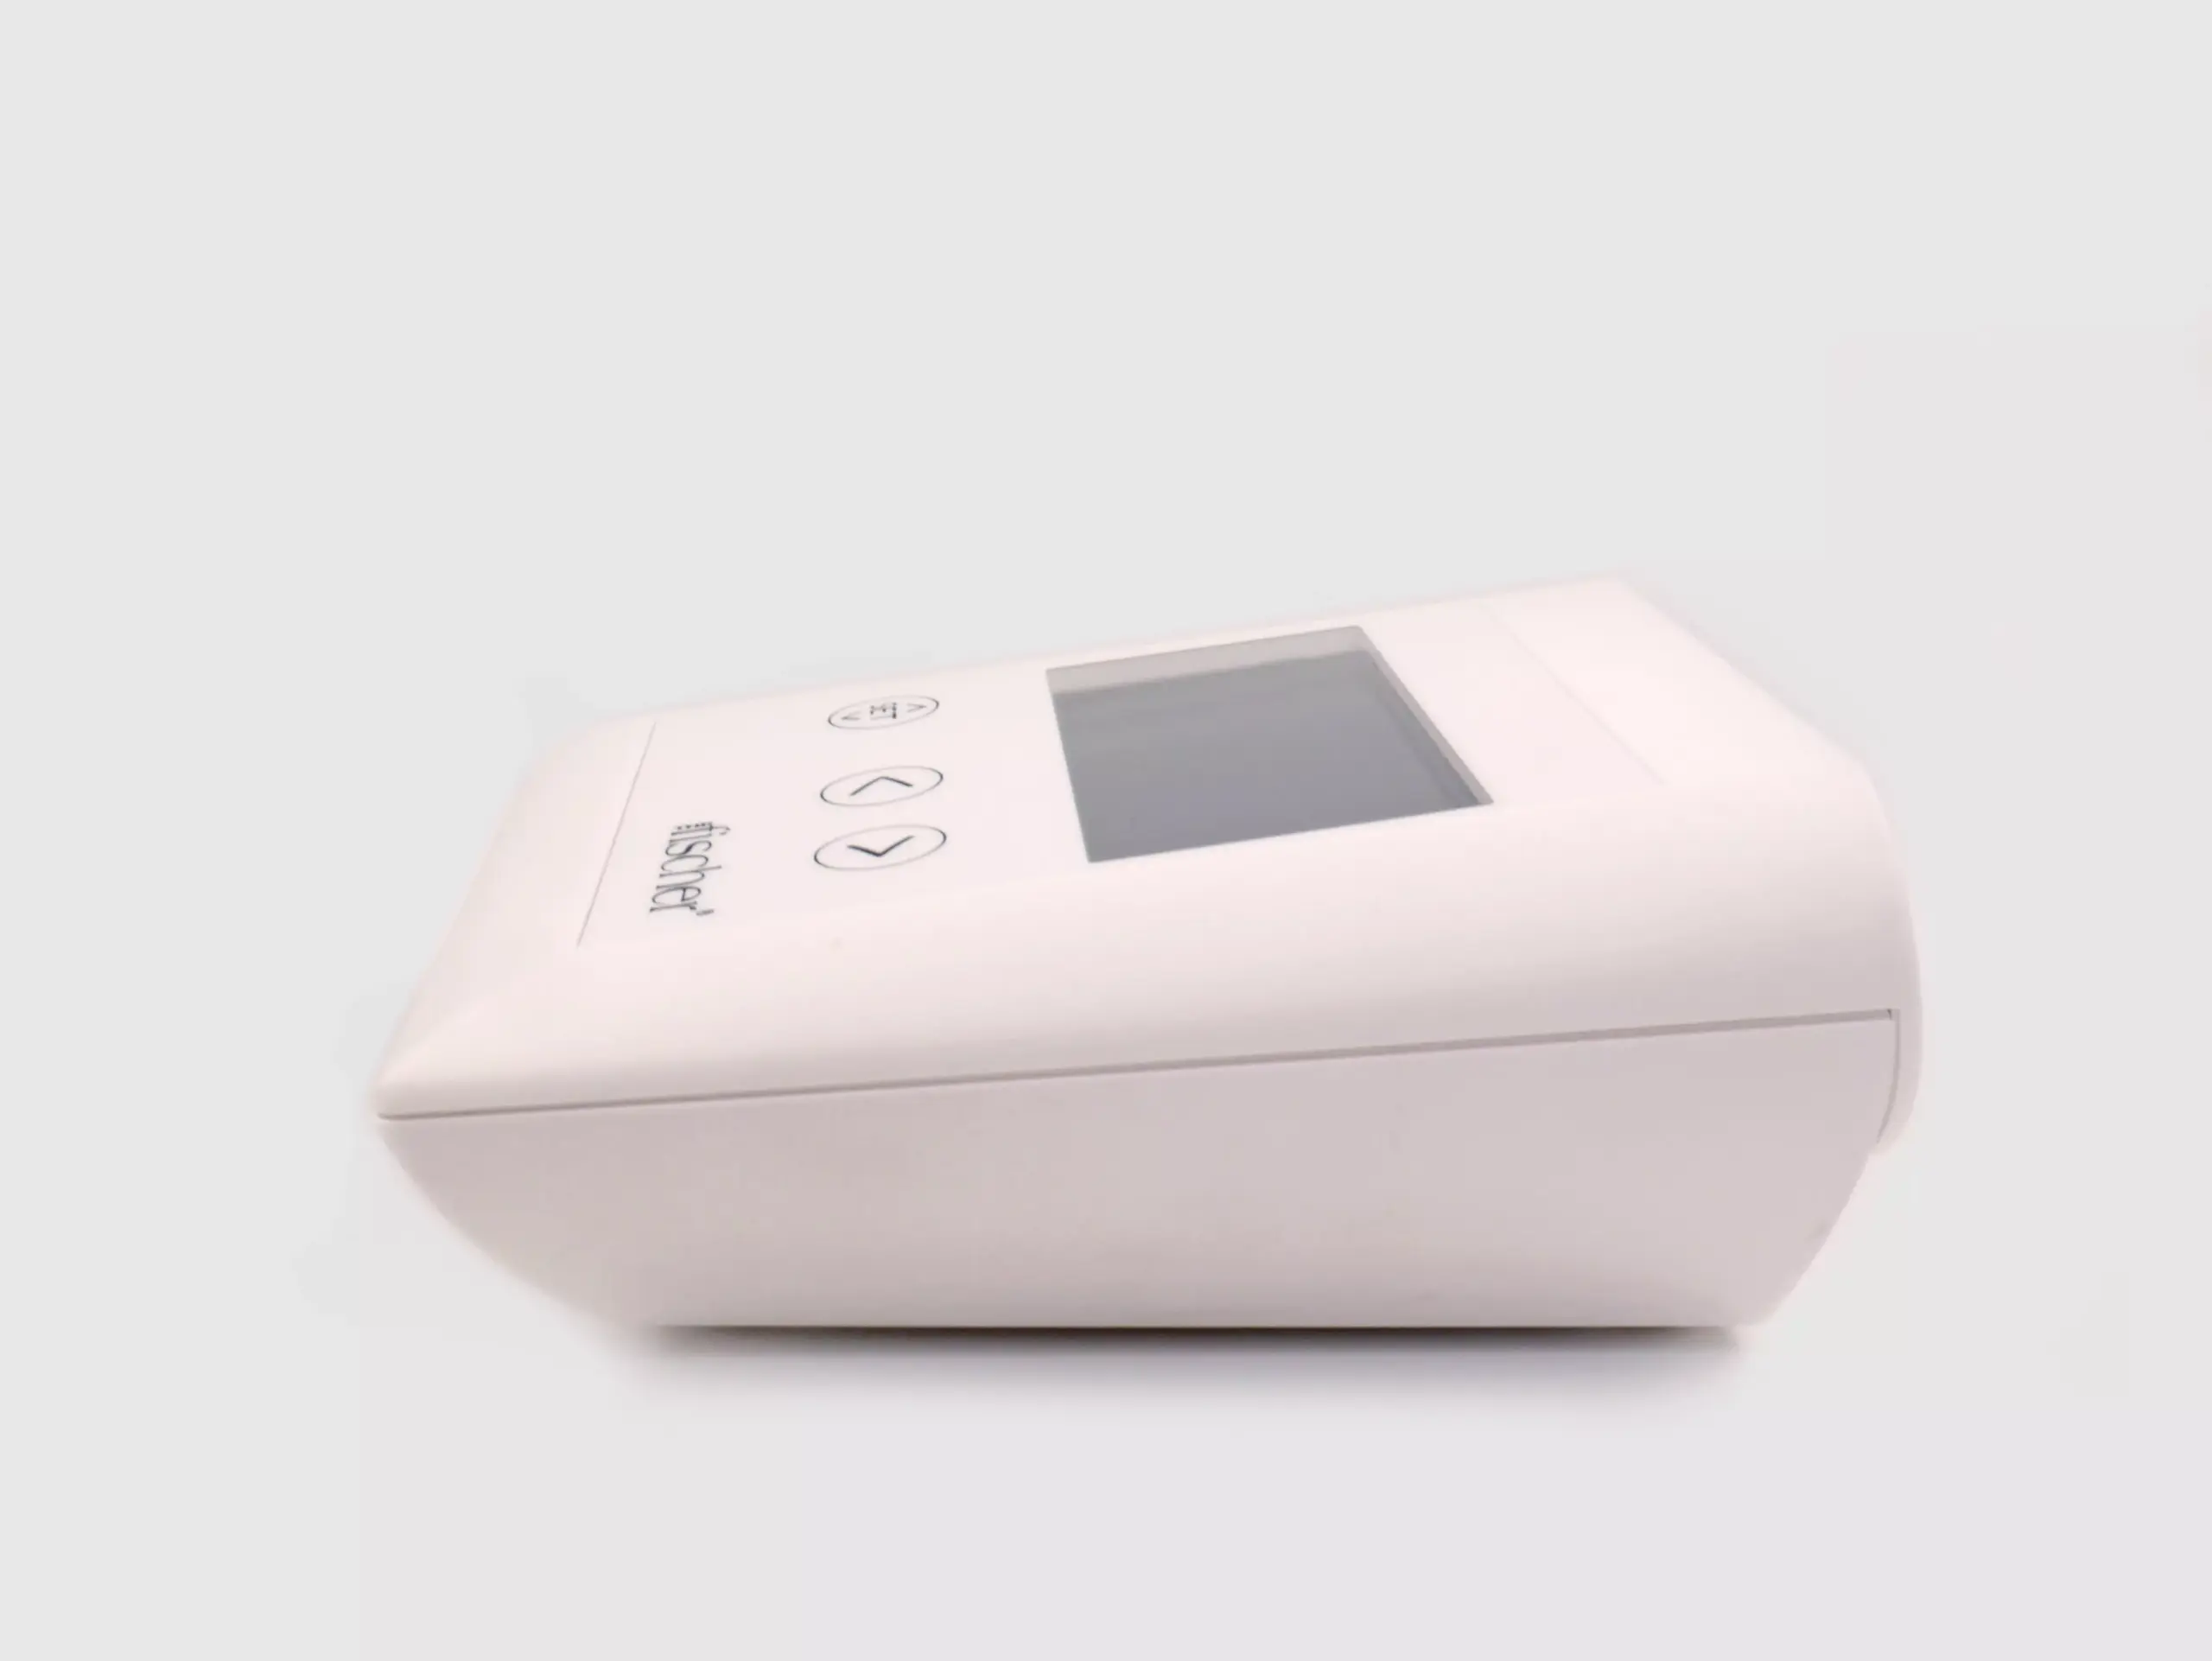 Side view photograph showcasing the white, rectangular 'main control unit' of RA Fischer's 'The Fischer' Device - an iontophoresis device meticulously tailored for hyperhidrosis (excessive sweating) treatment.. The image features a white background [ Iontophoresis Device for Sweating ]